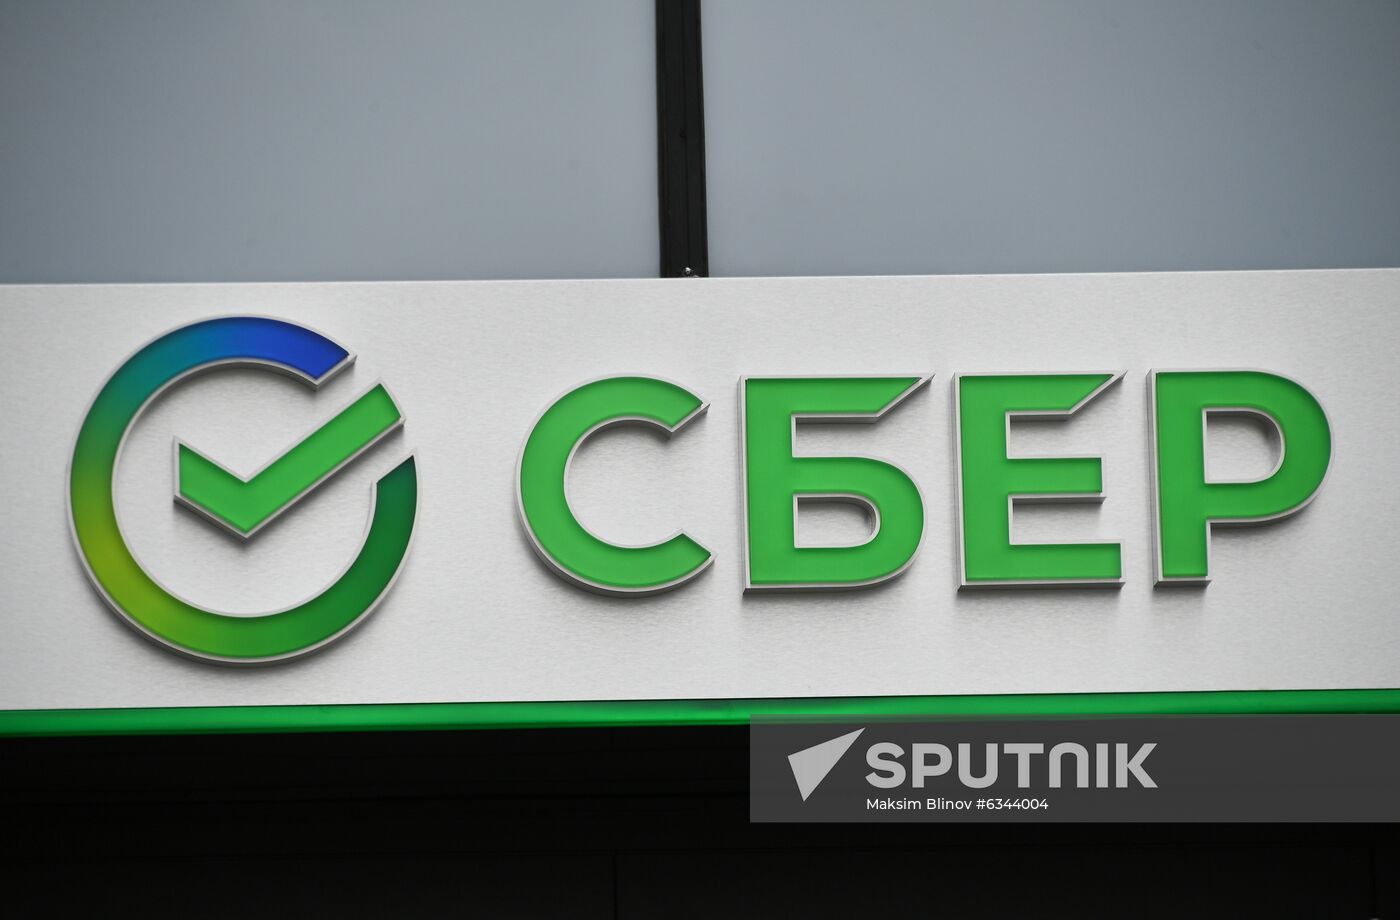 Russia Sber Brand New Office